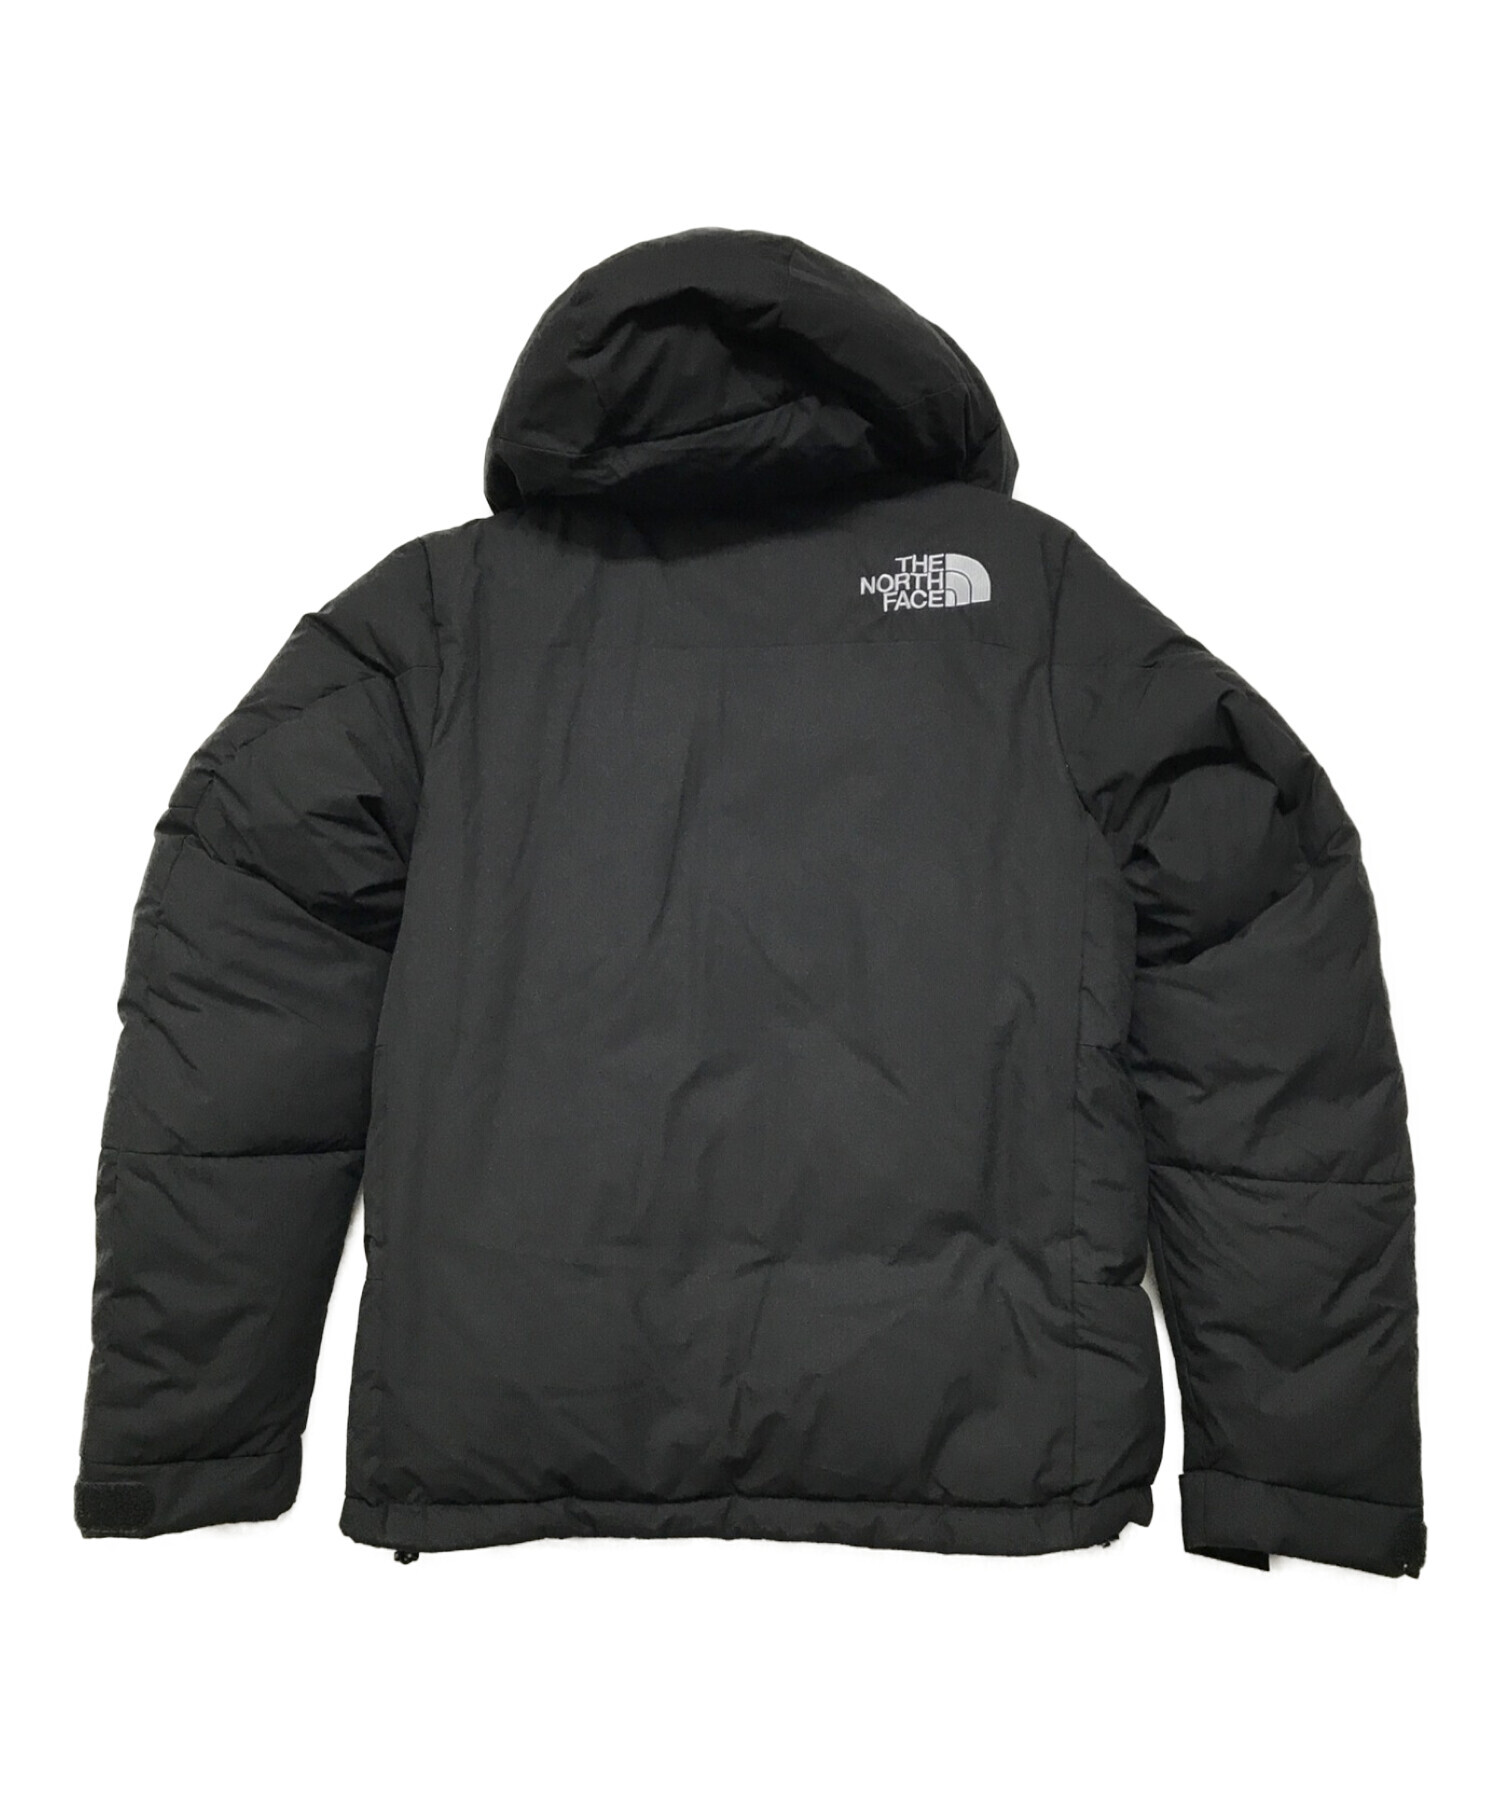 THE NORTH FACE バルトロ　ライトジャケット XS